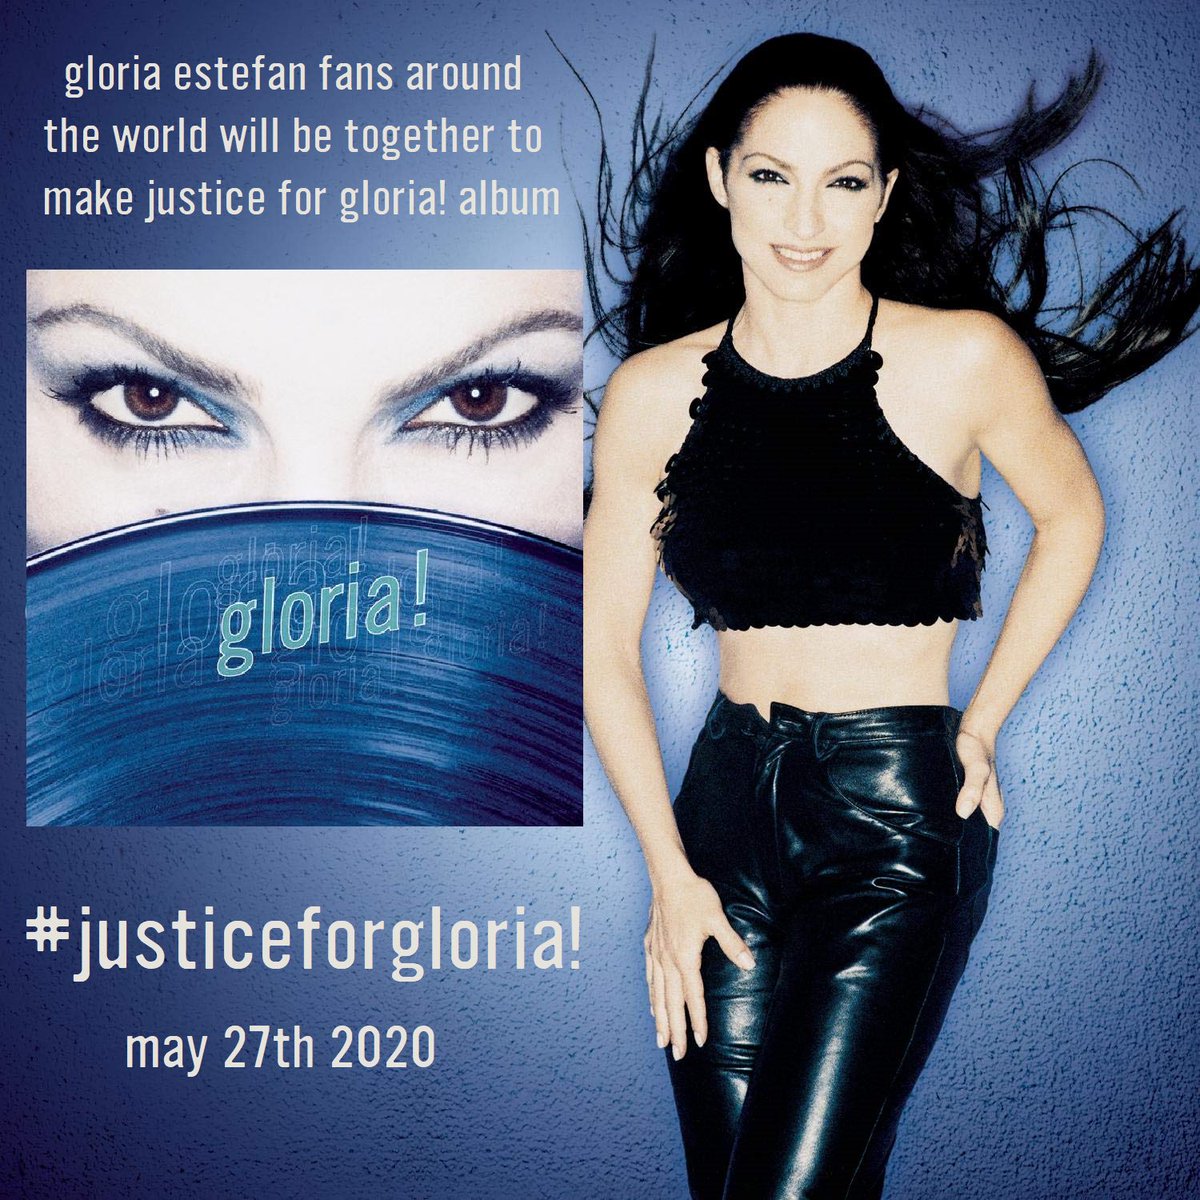 We’re actively working on the singles for the Gloria! era. Four great singles from one amazing album #justiceforgloria Have a listen here: music.apple.com/gb/album/glori…